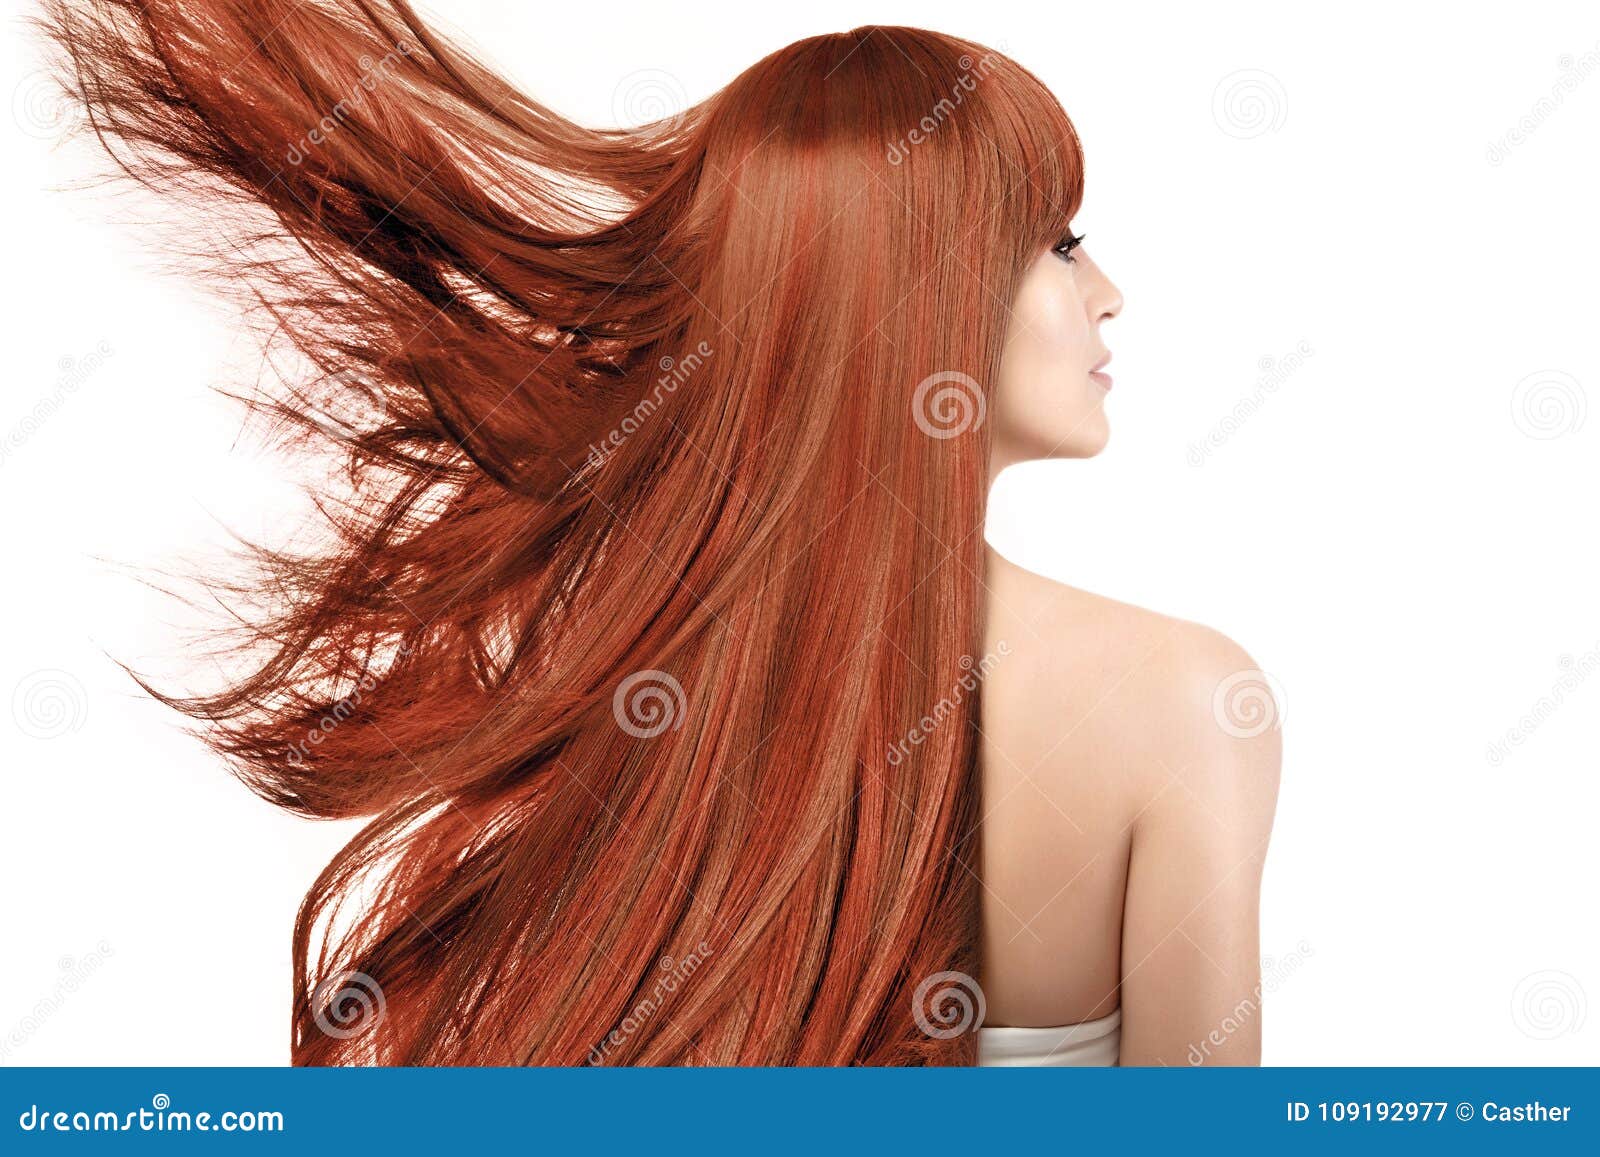 Beauty Portrait of a Woman with Dyed Long Hair with Highlights Stock Image  - Image of girl, dyed: 109192977